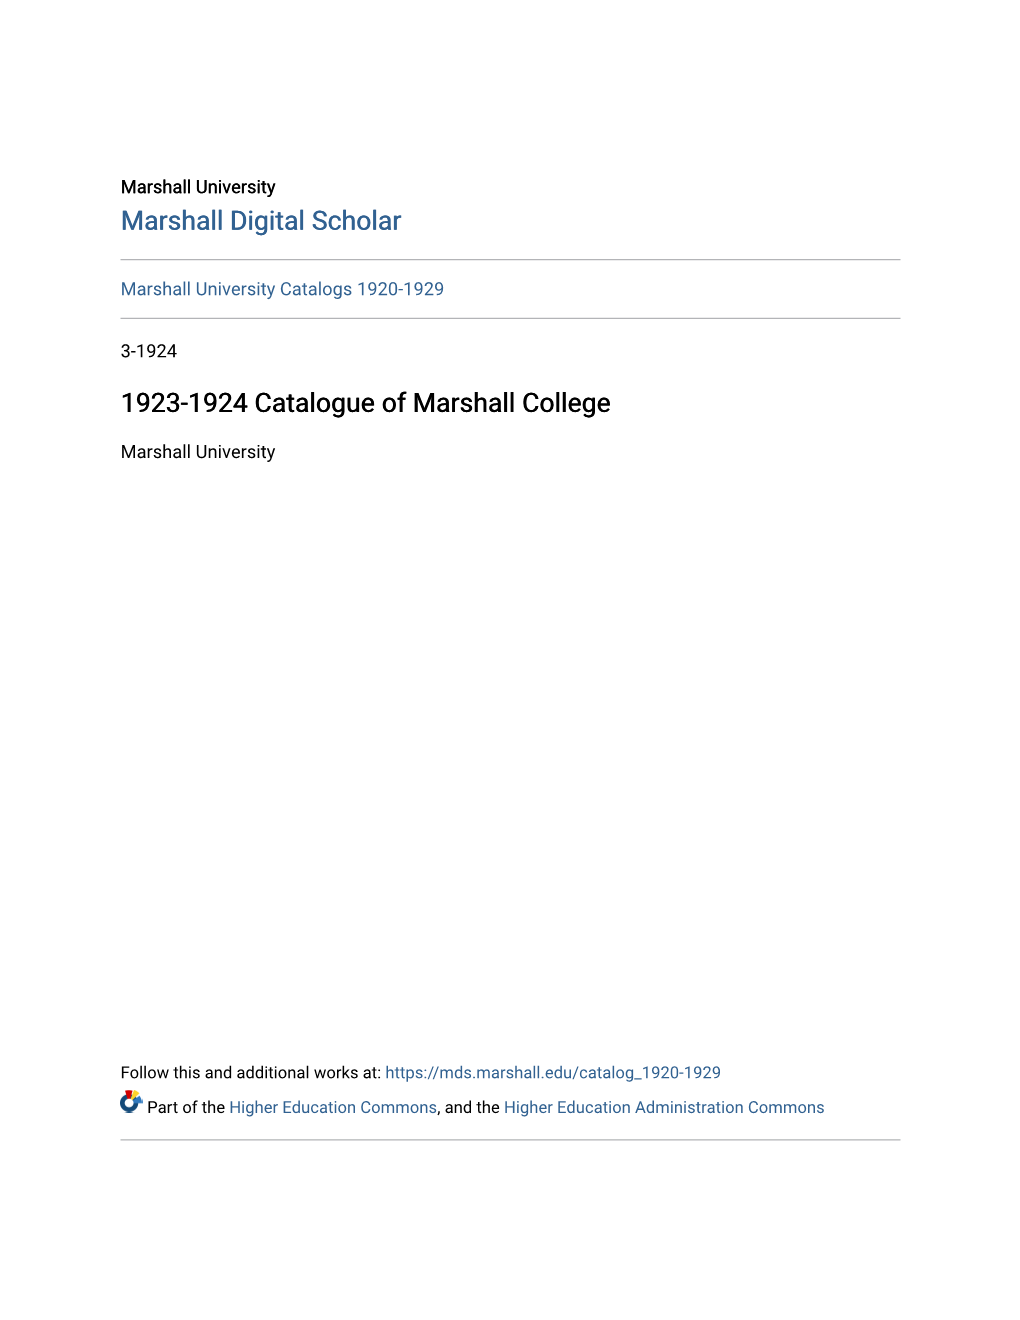 1923-1924 Catalogue of Marshall College